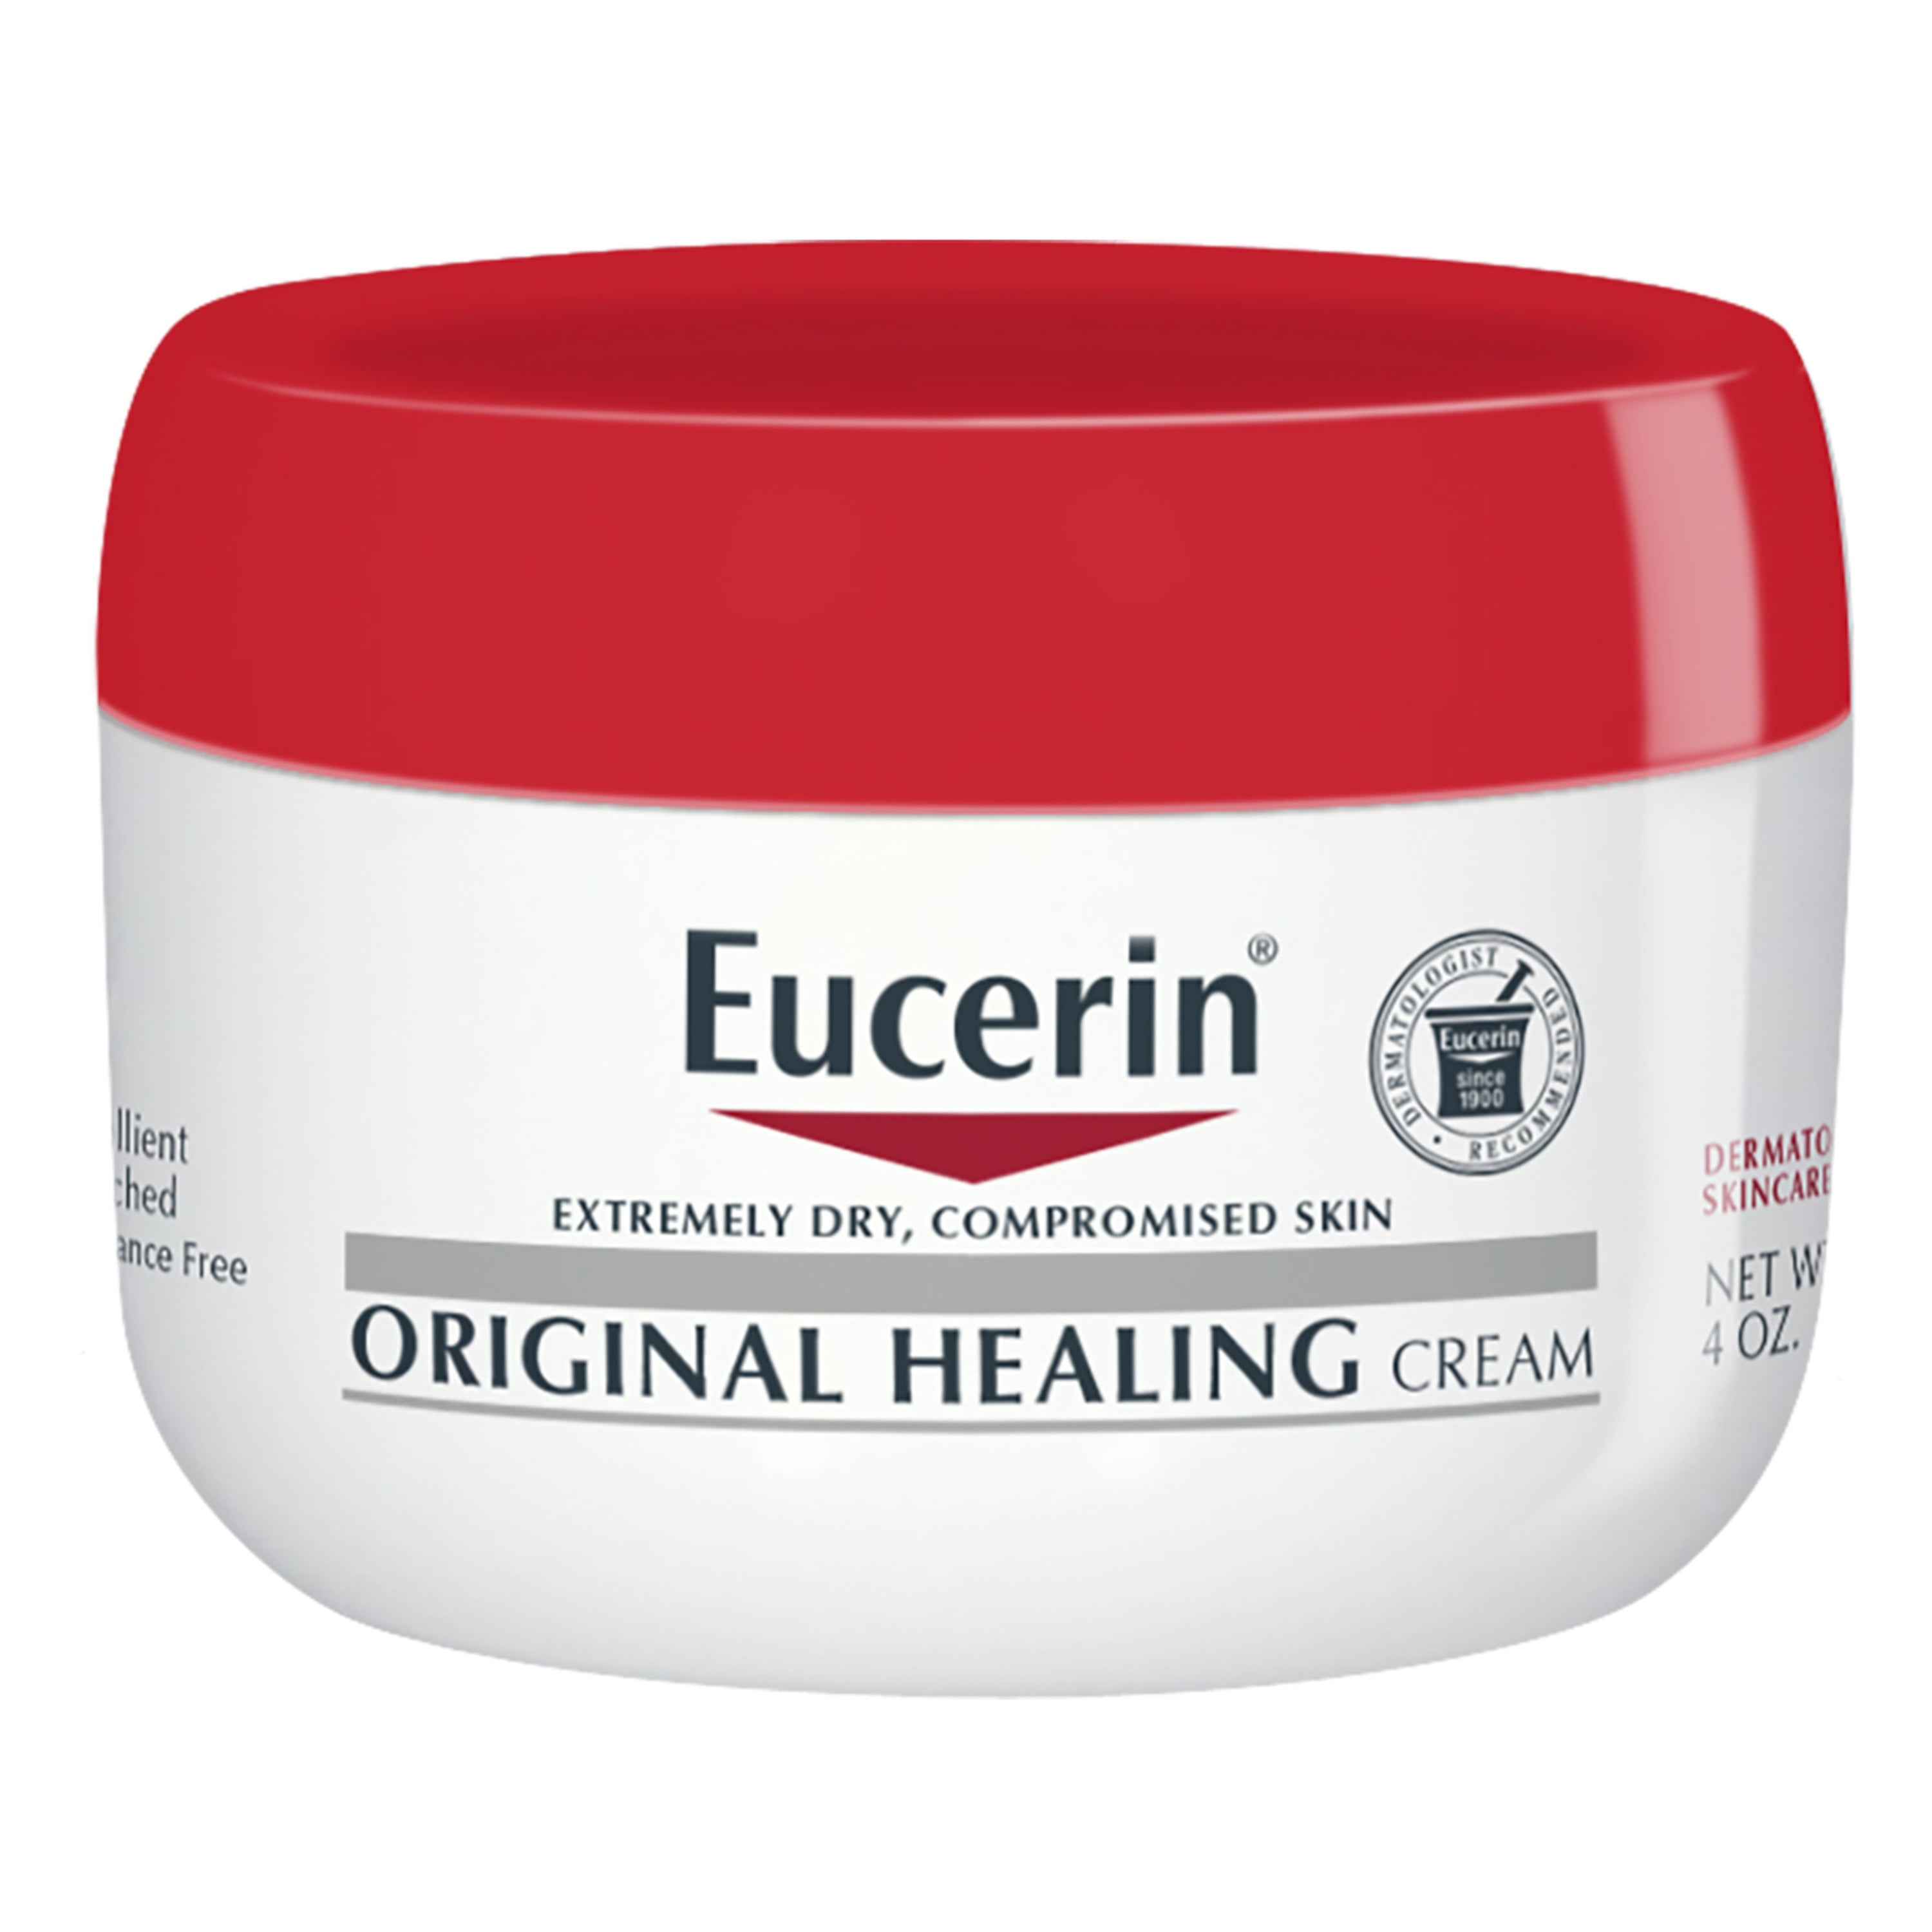 Eucerin Original Healing Cream for extremy dry, compromised skin